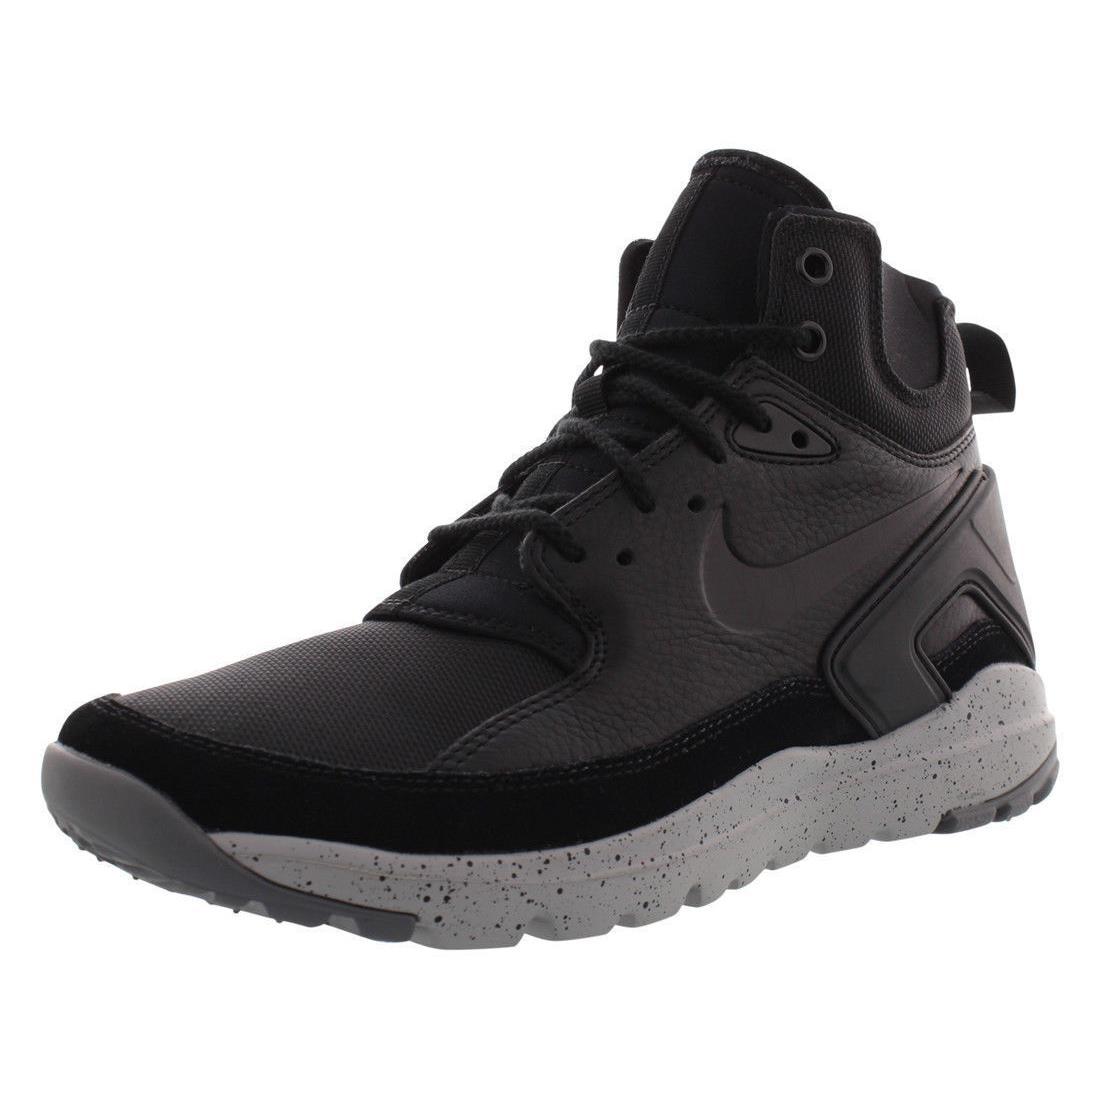 Nike Koth Ultra Mid Outdoors Kid`s Shoes 859411-001 Black/silver/grey US Size 7Y